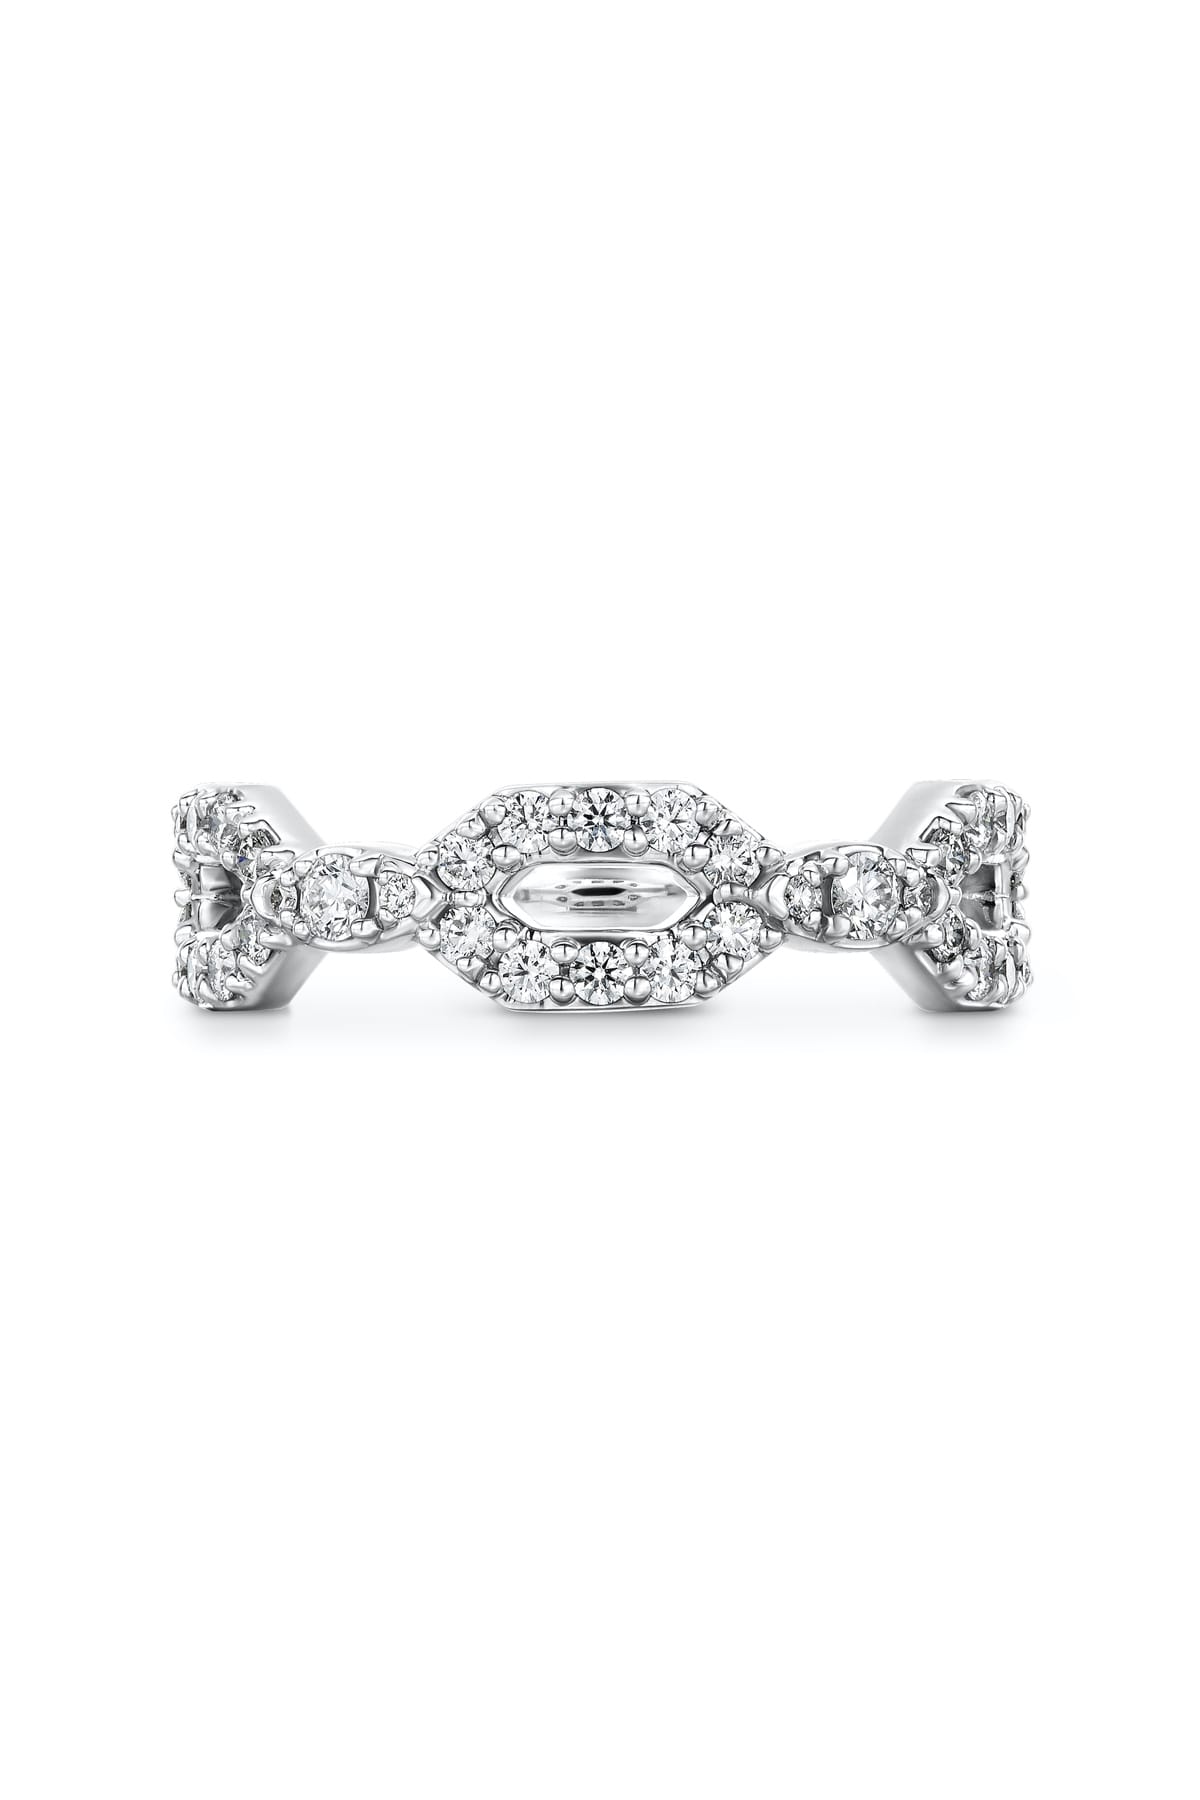 Open Regal Diamond Band From Hearts On Fire available at LeGassick Diamonds and Jewellery Gold Coast, Australia.